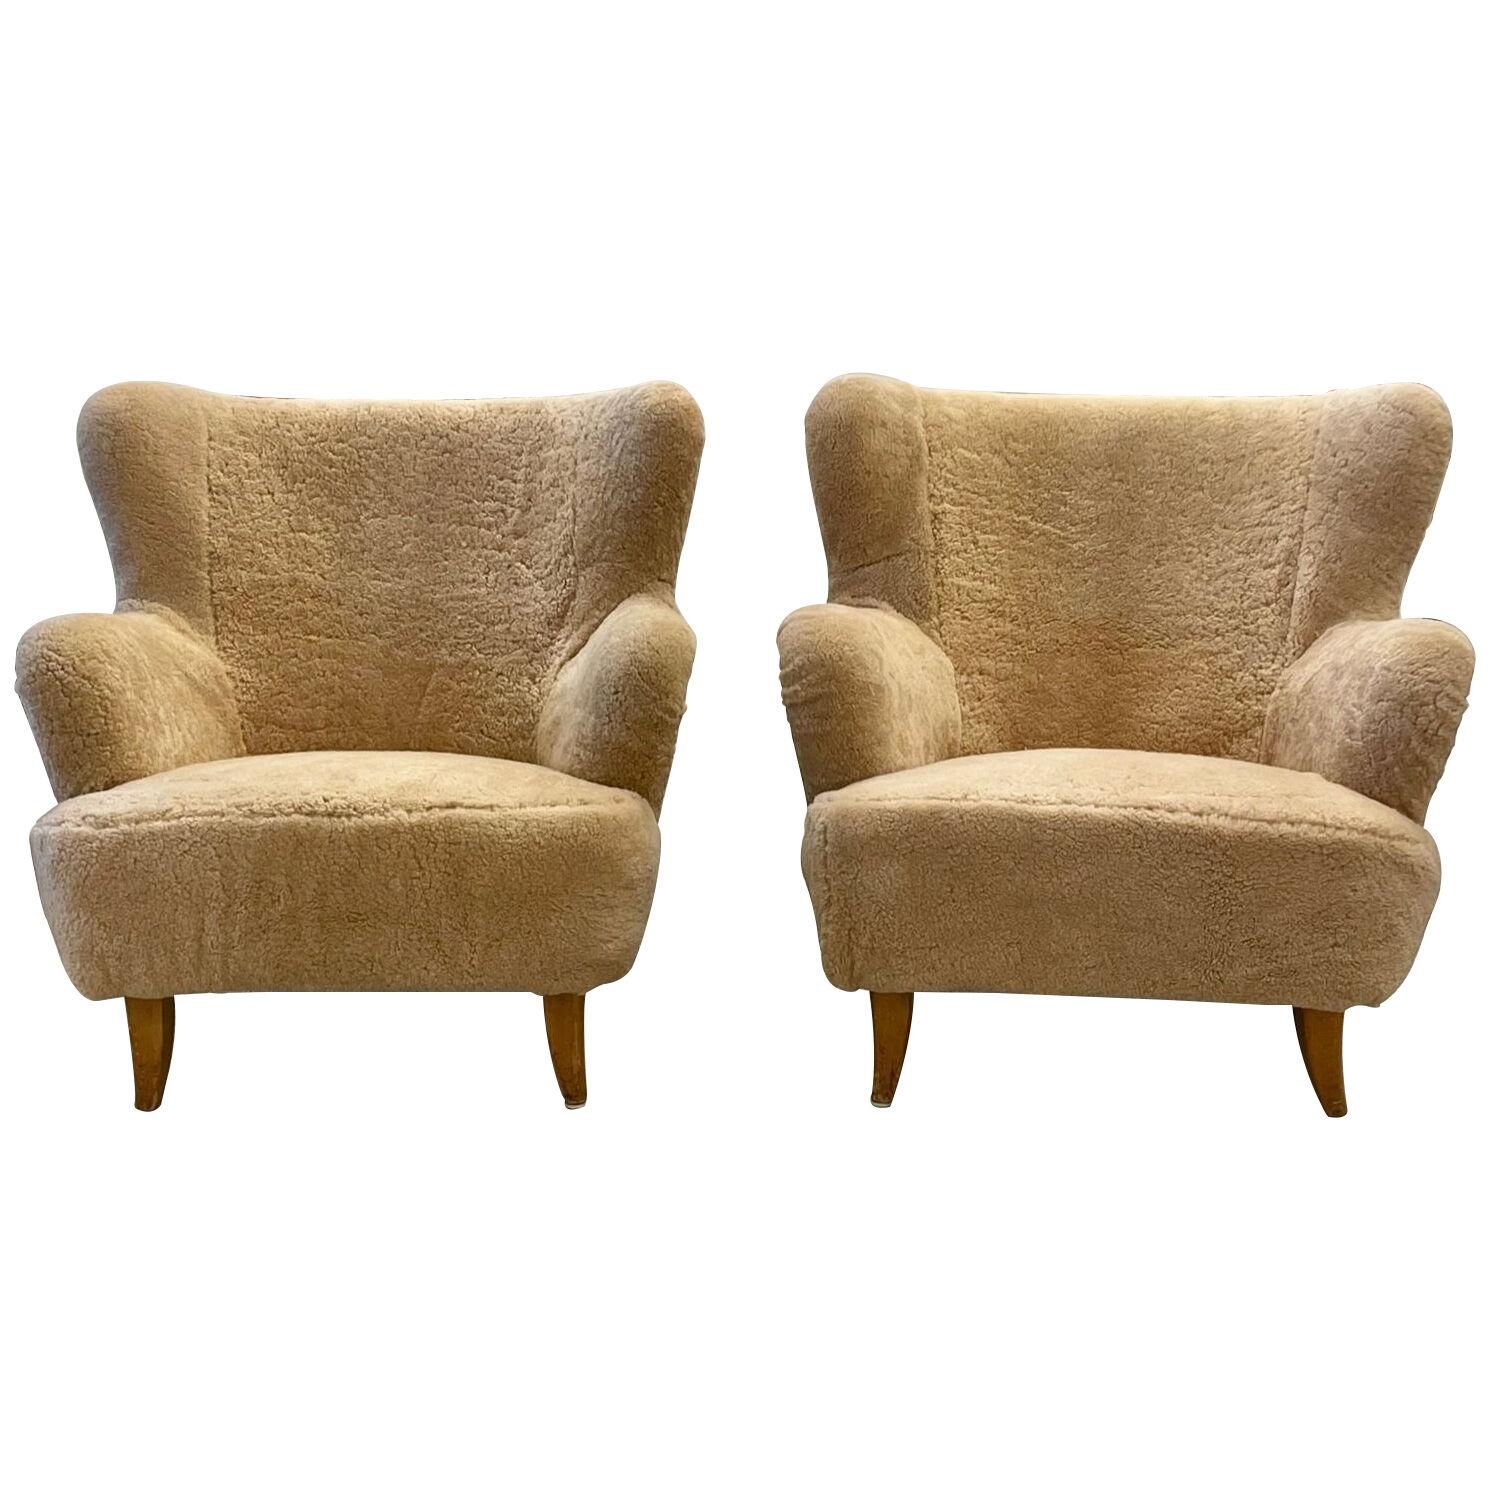 Pair of Mid-Century Modern Danish Cabinet Maker Lounge, Club or Wingback Chairs